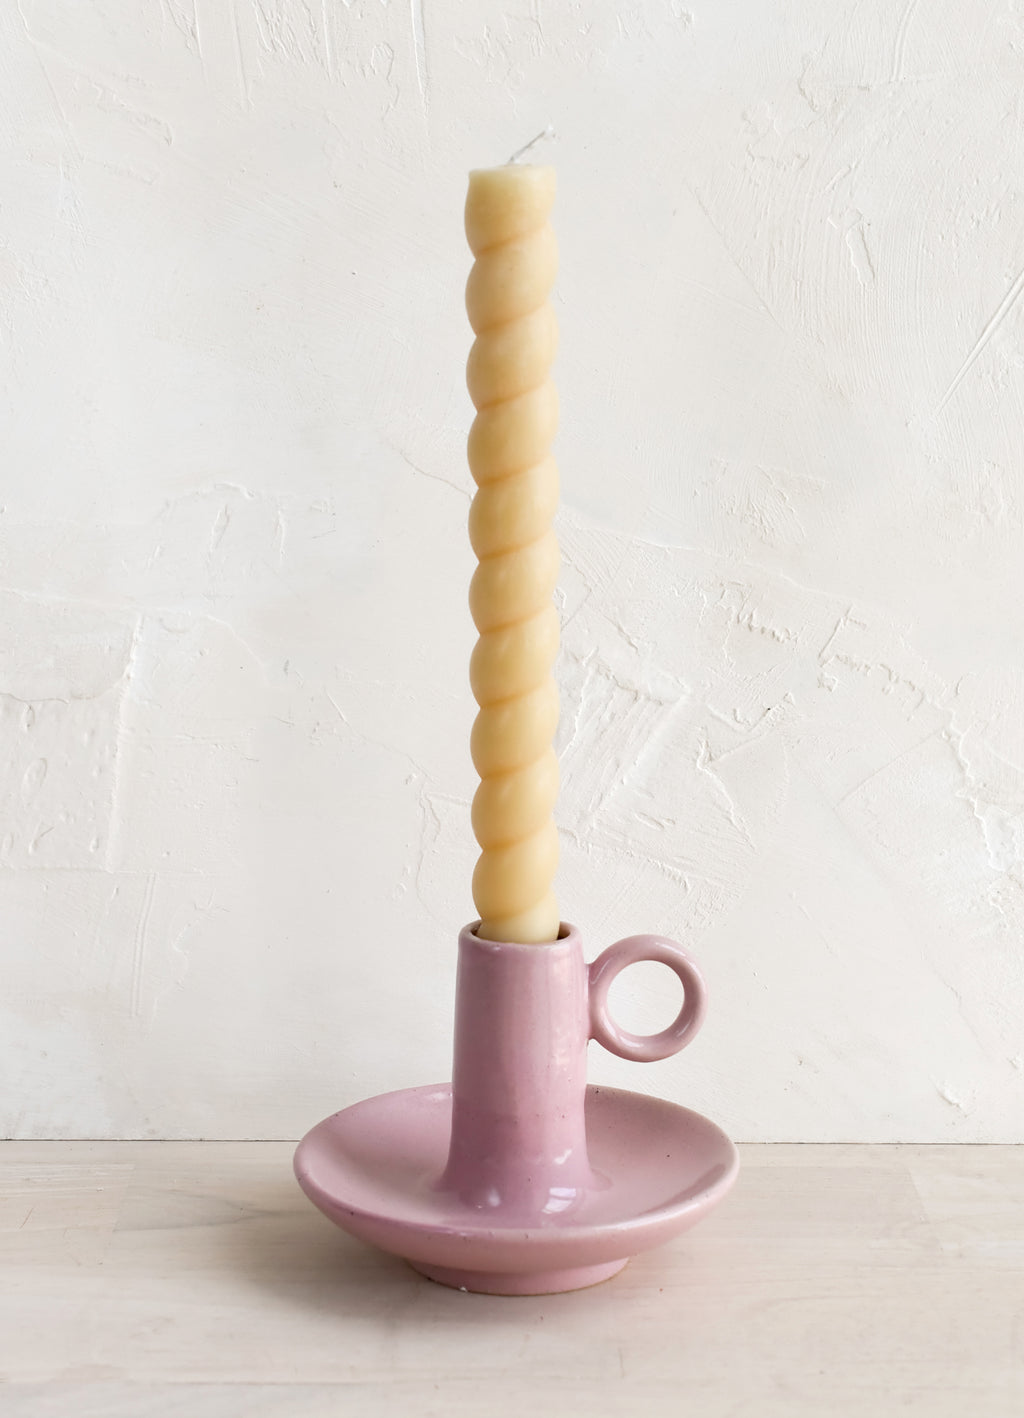 2: A pink taper holder holding a twisted taper candle.